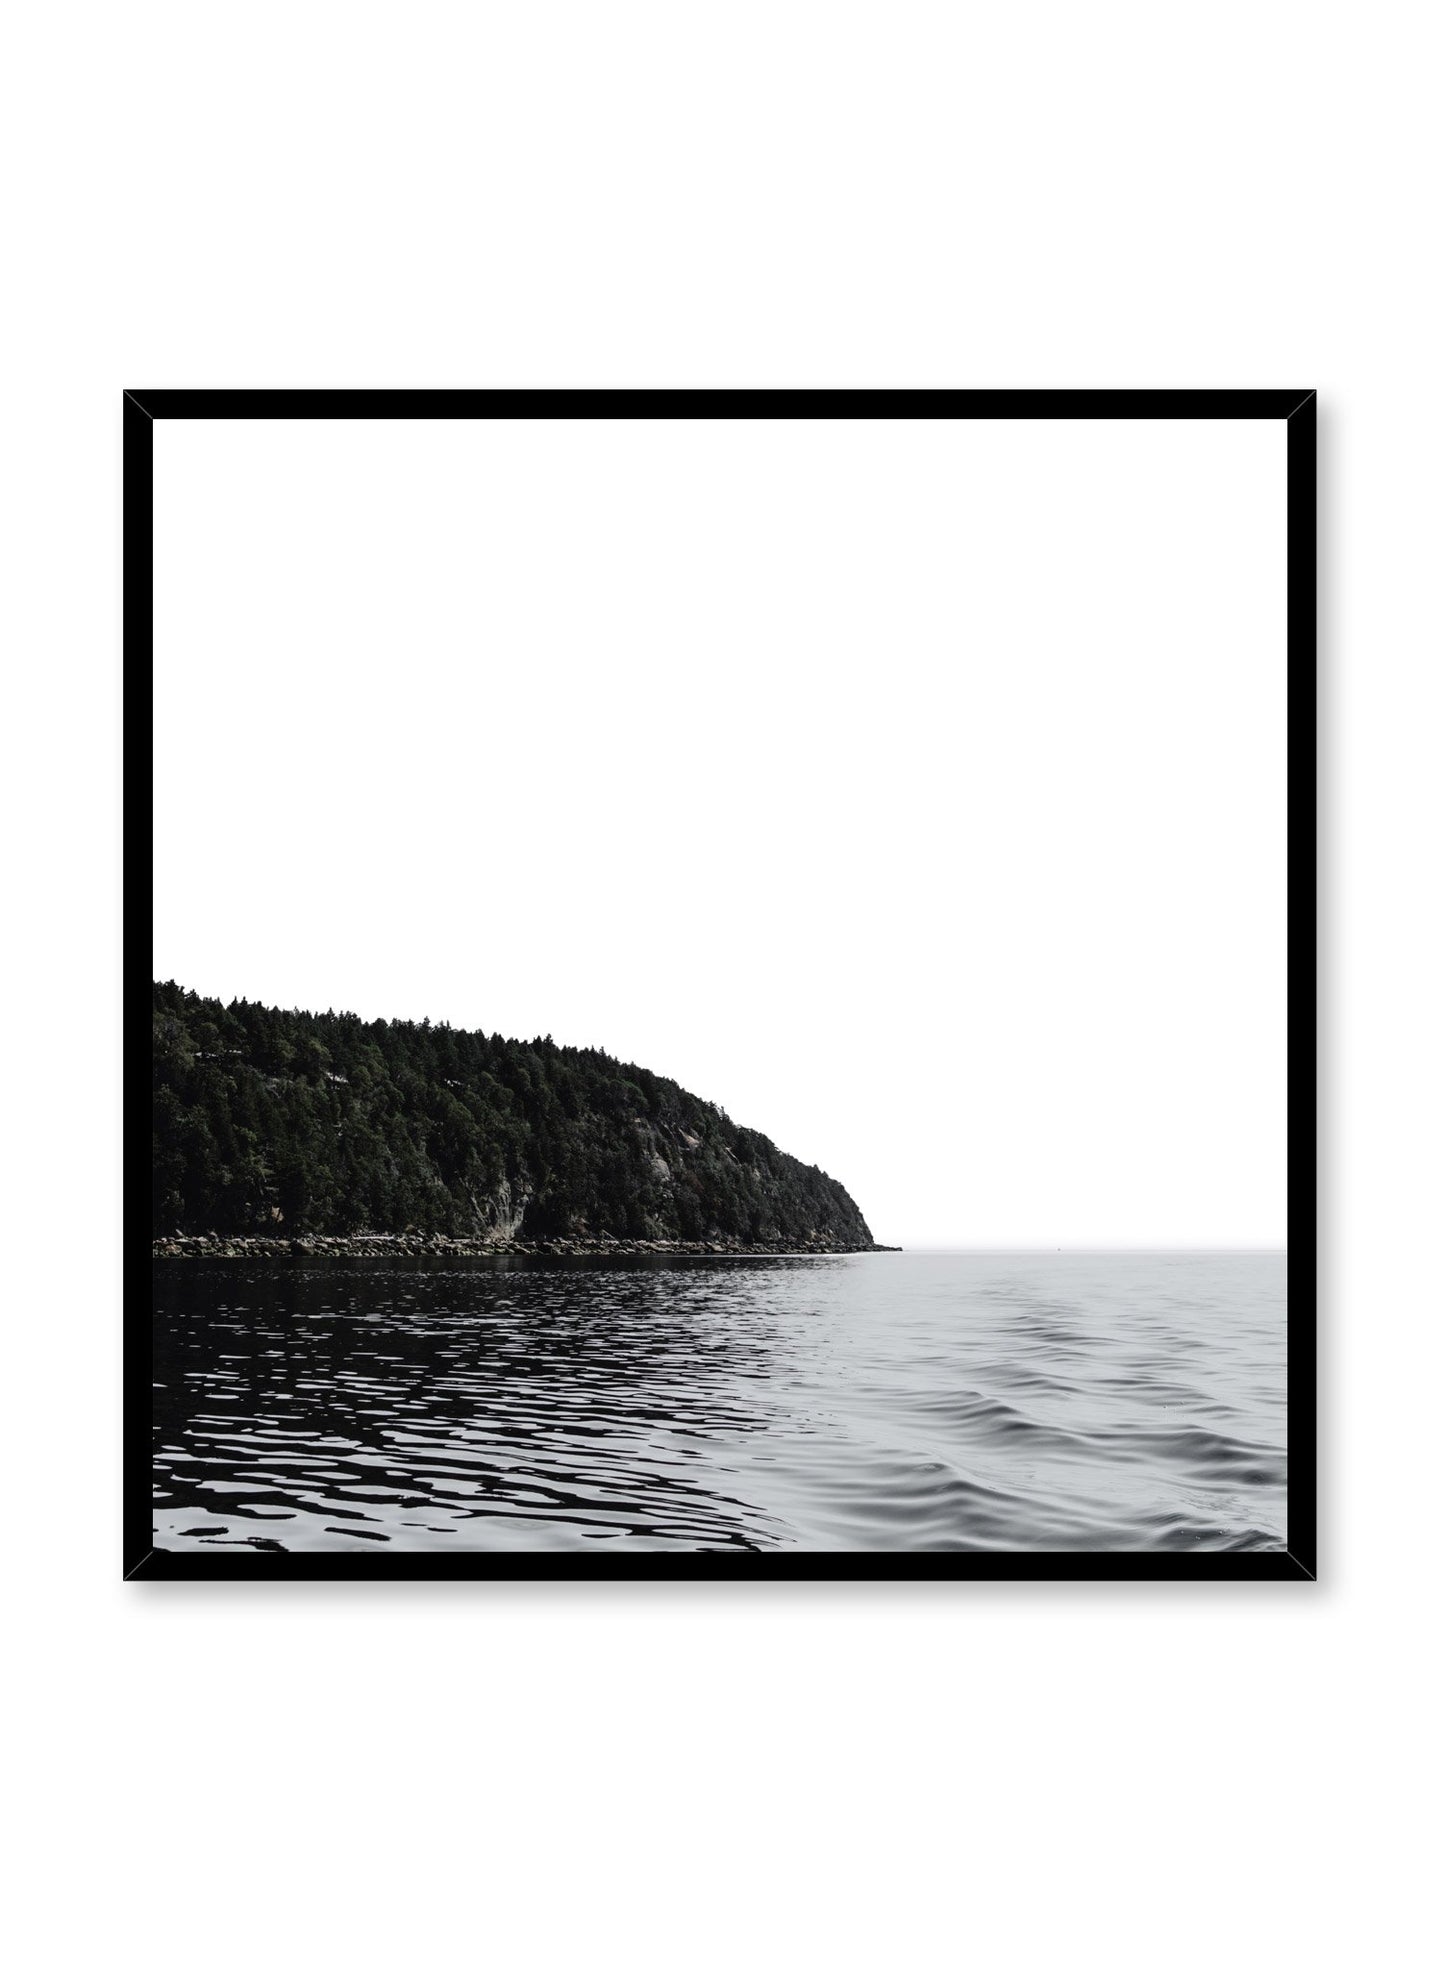 Minimalist design poster by Opposite Wall with nature photography of Vancouver Island and ocean in square format